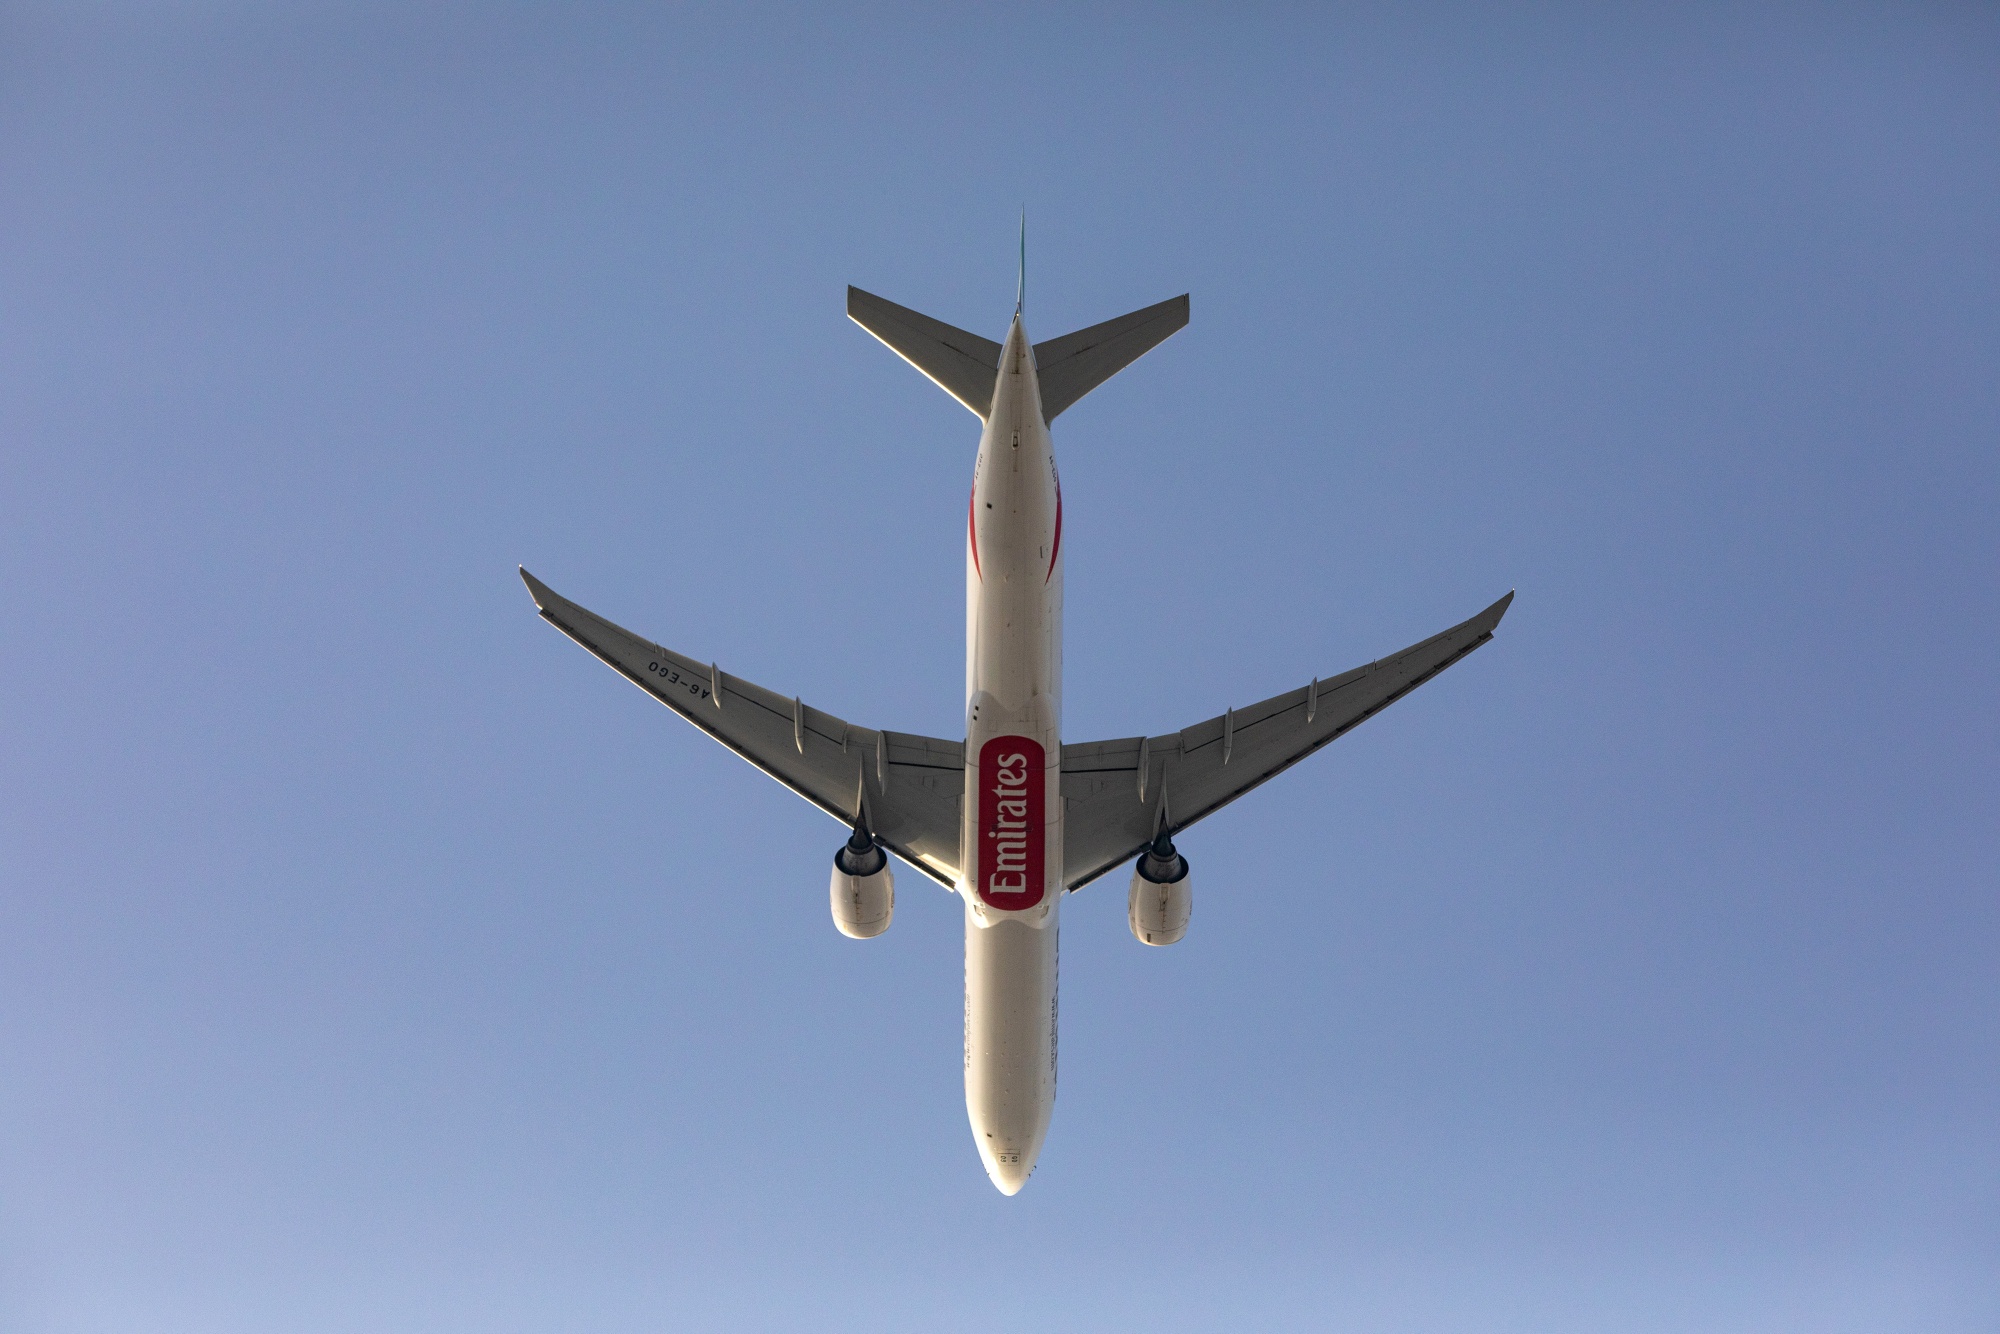 A Boeing Co. 777-300 aircraft, operated by Emirates, takes off from Dubai International Airport in Dubai.